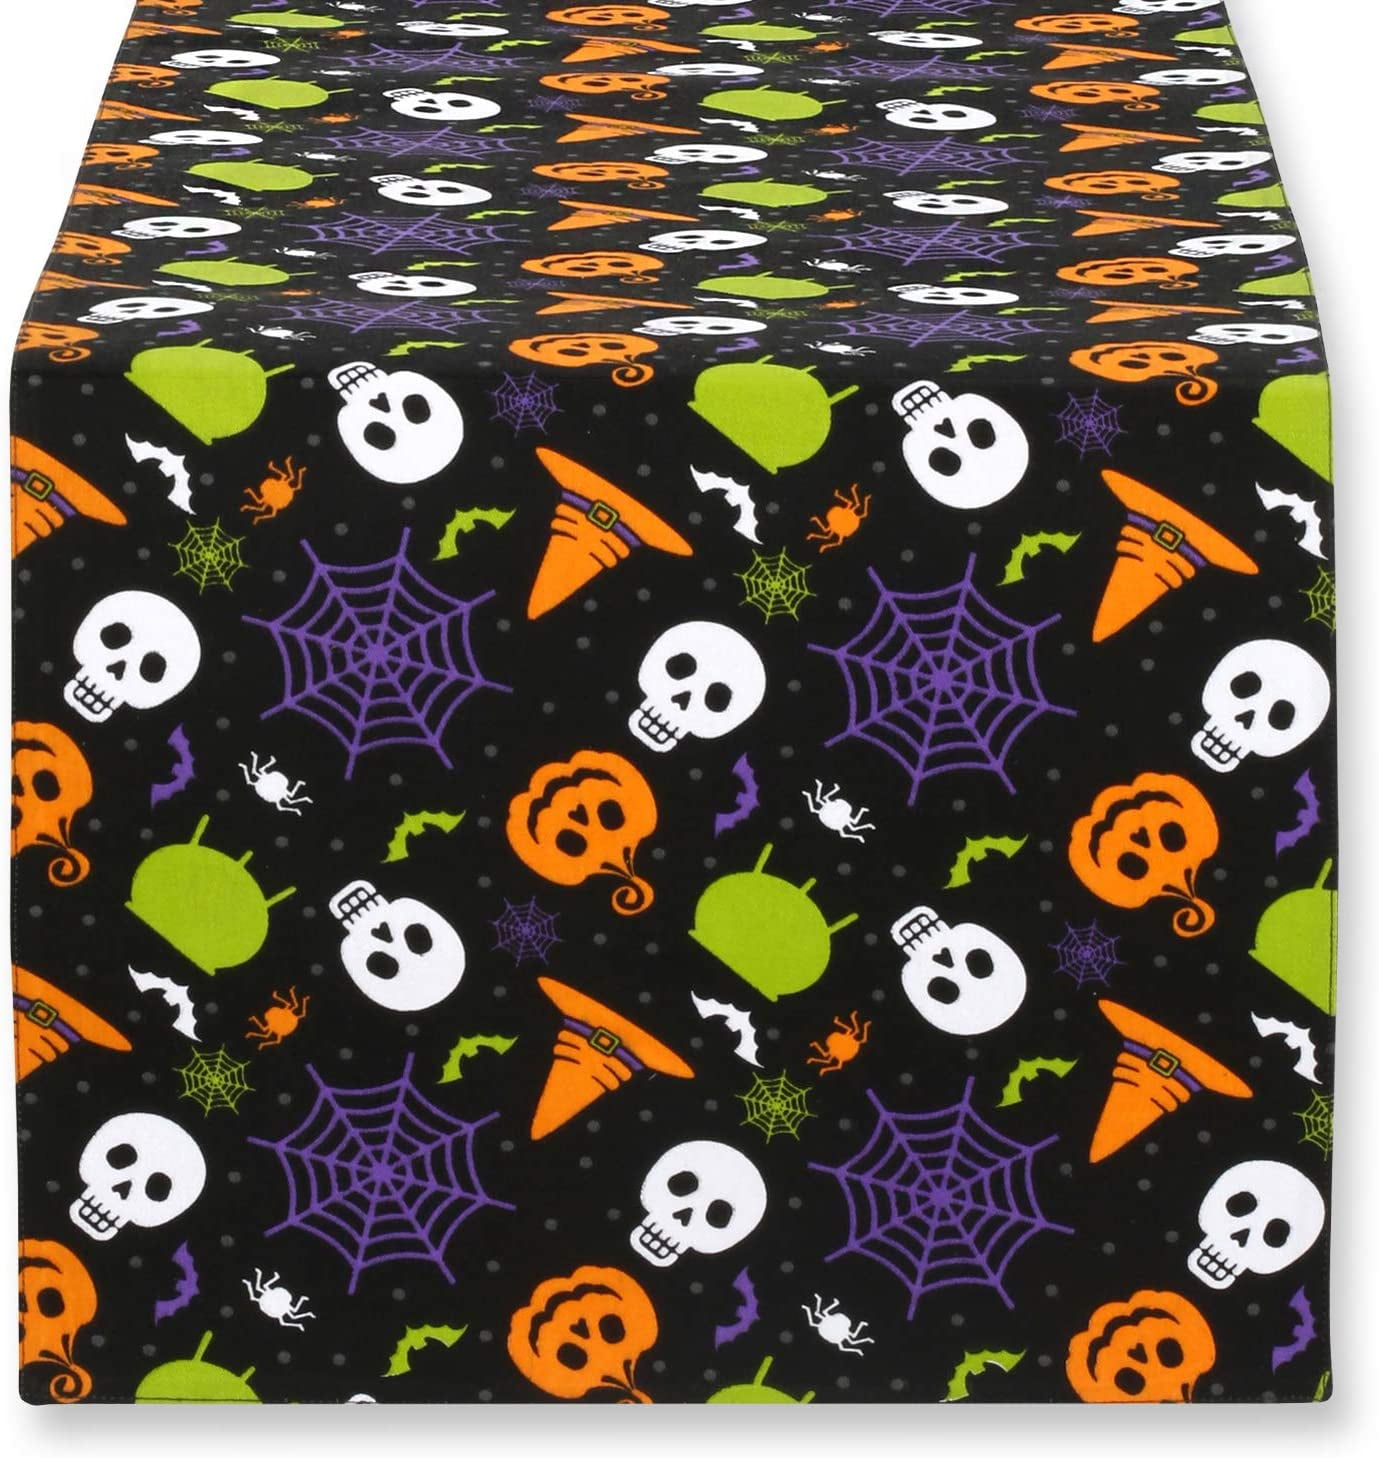 Details about   Witches Brew Table Runner Spirit Halloween Party Decoration Spooky Potion Occult 